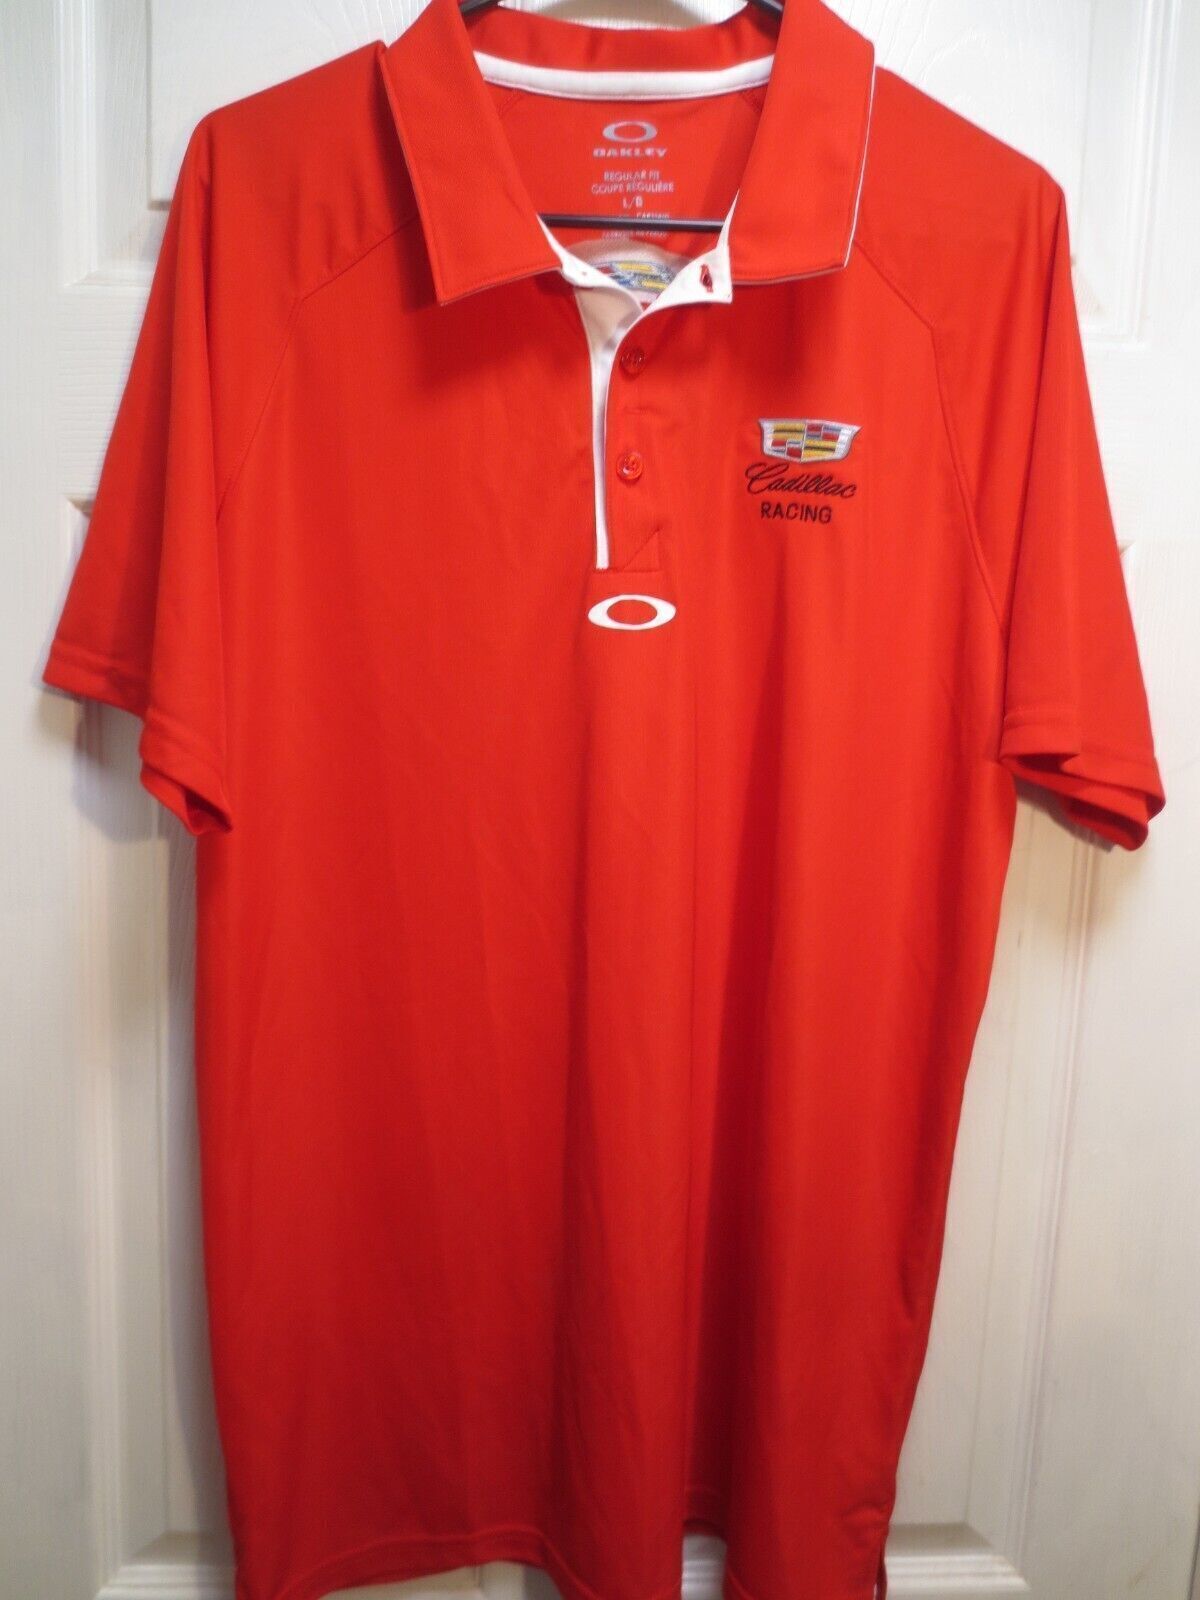 OAKLEY CADILLAC RACING EMBROIDERED RED POLO SHIRT SIZE LARGE